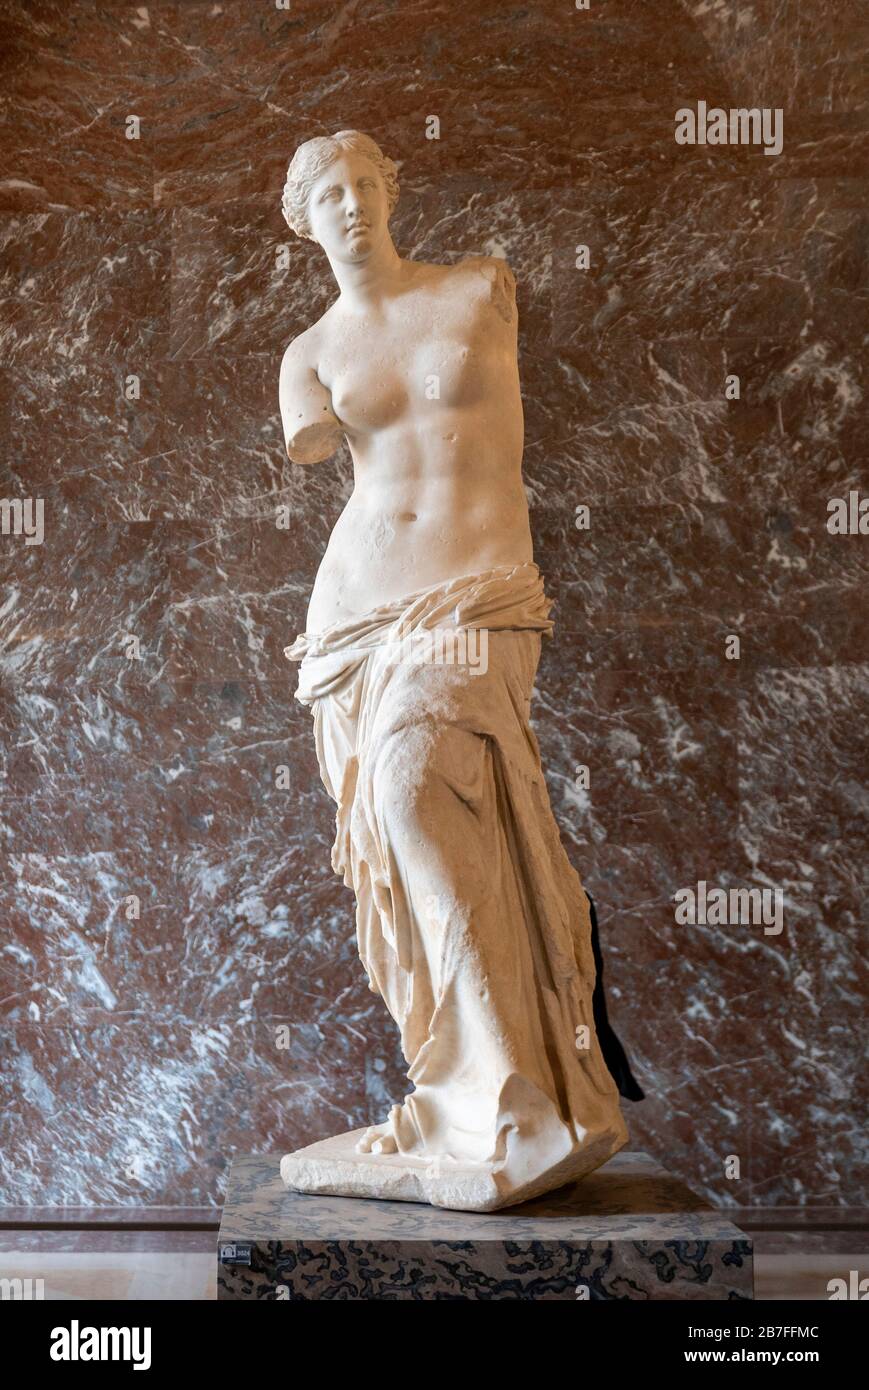 The Venus de Milo ancient greek marble statue by artist Alexandros of Antioch, dating from around 130-100 BC, at the Louvre Museum, Paris, France Stock Photo